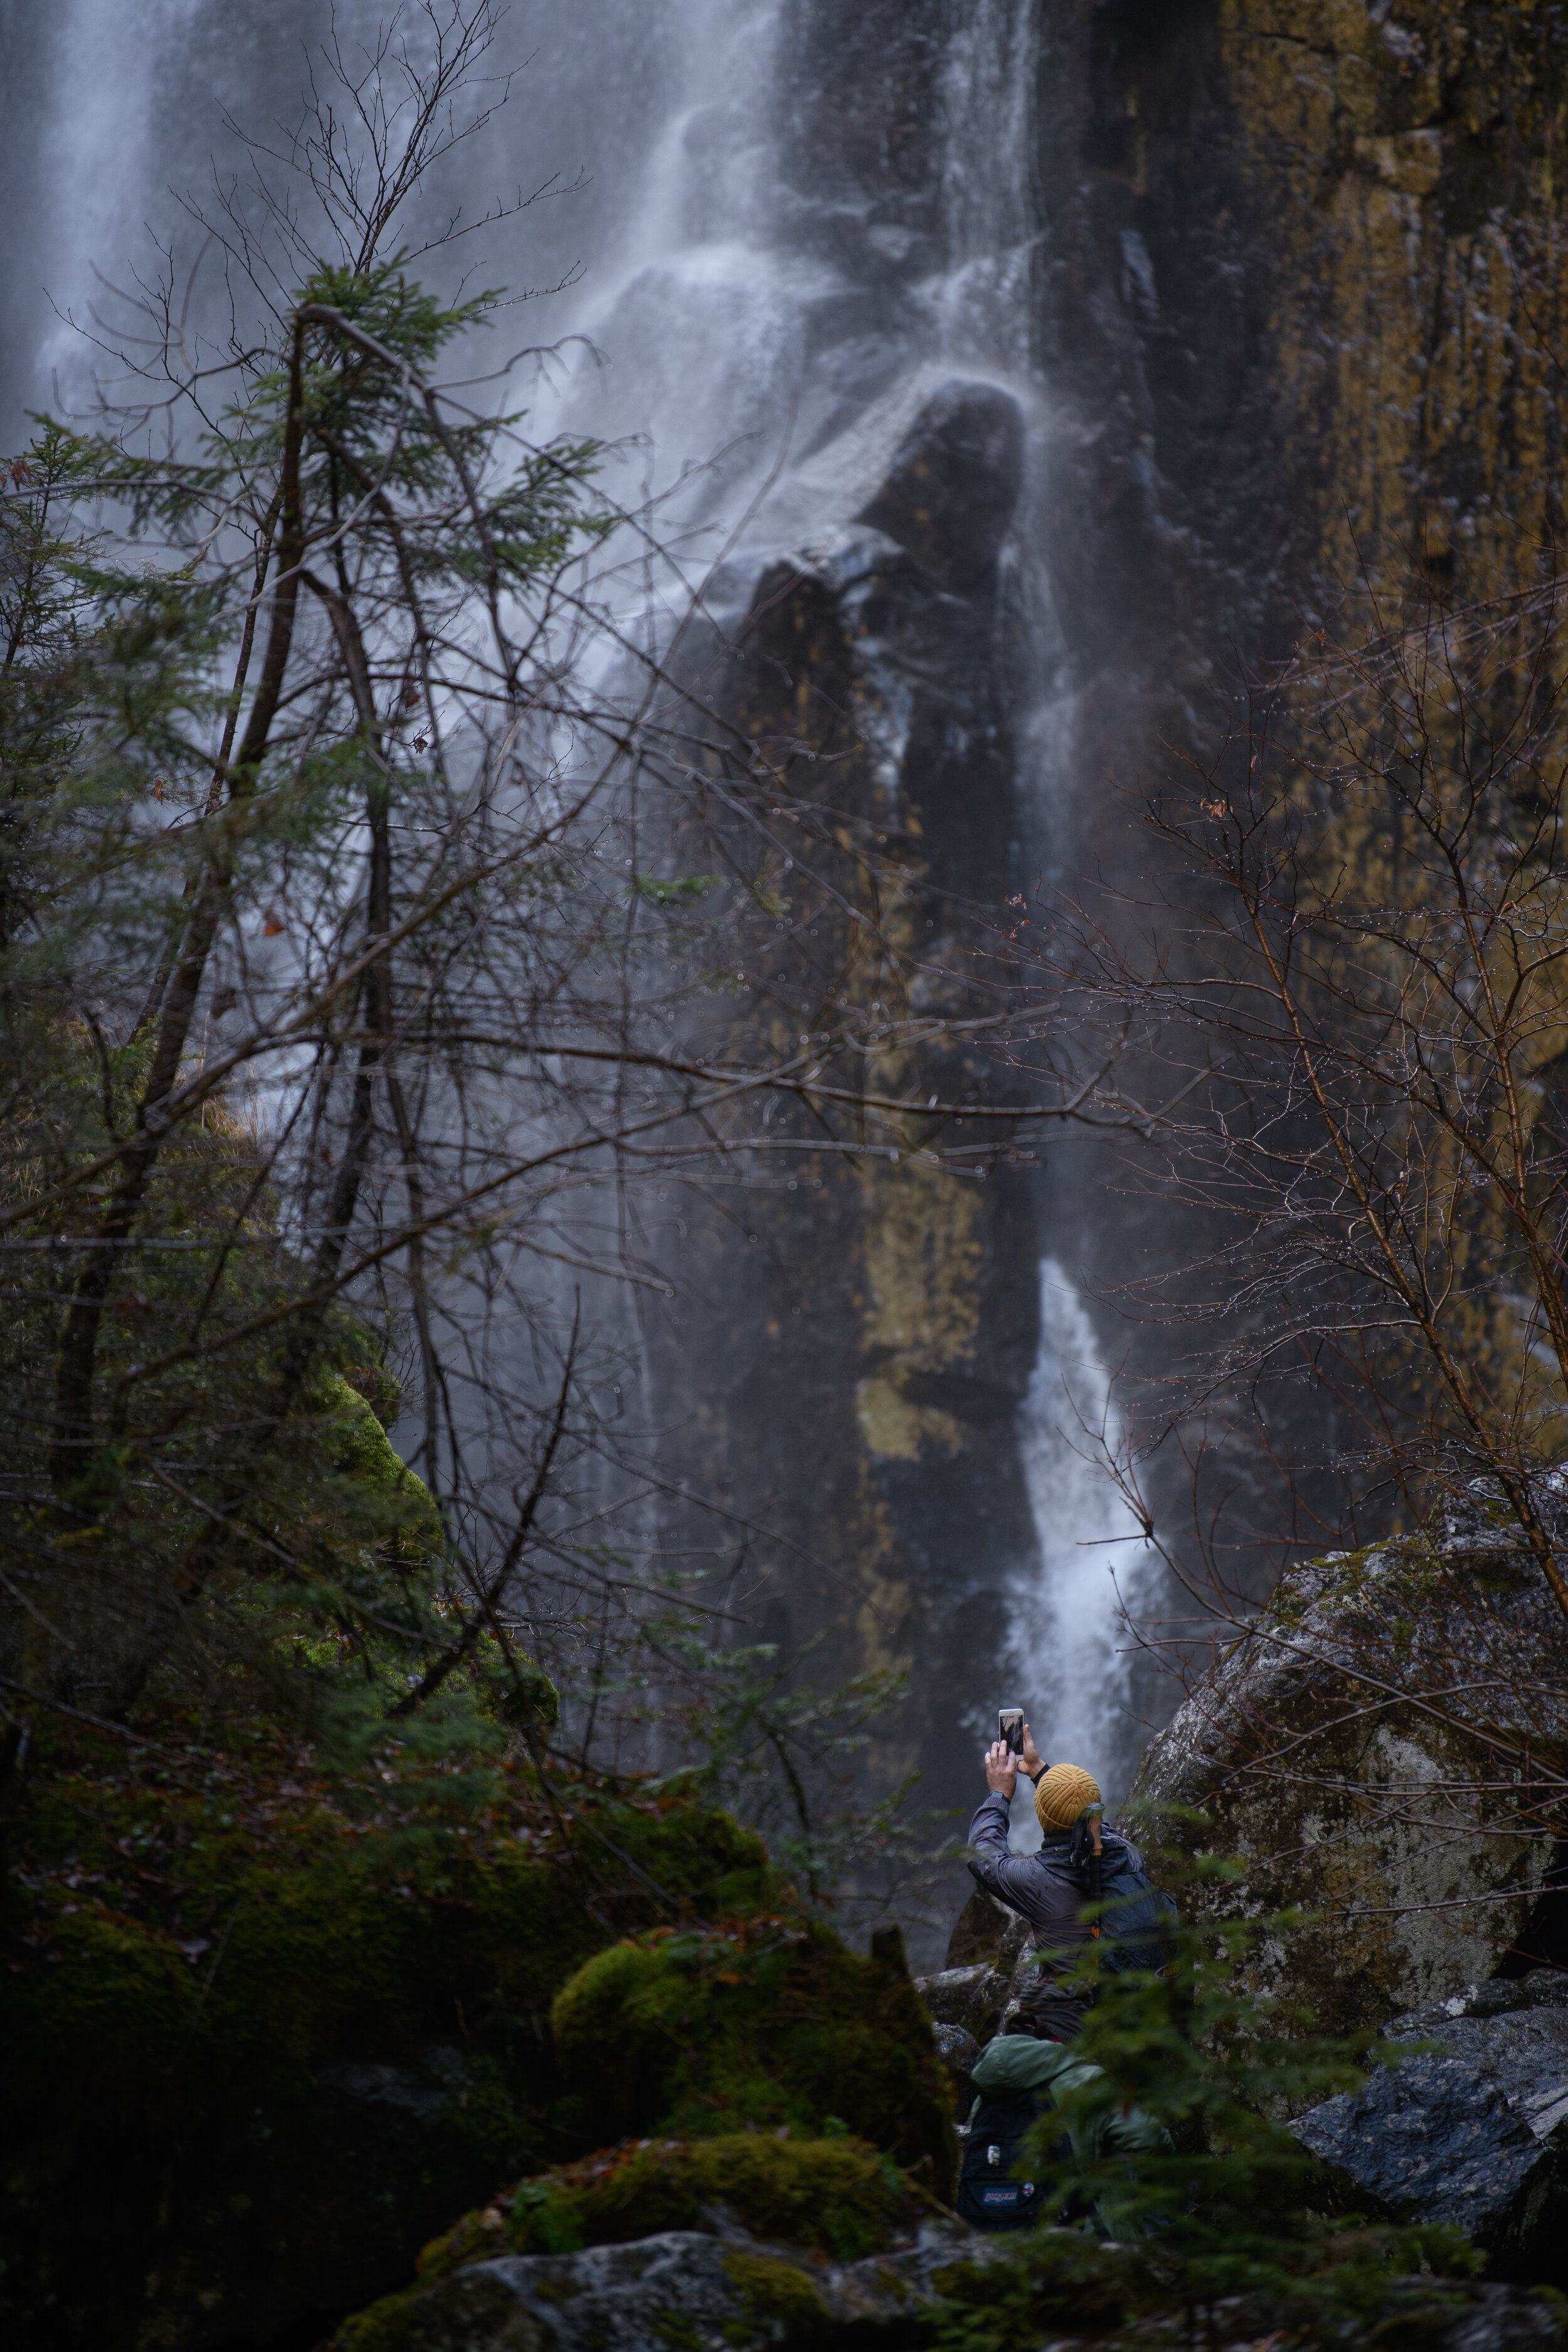 Man Taking Pictures at Rainbow Fall, 2020